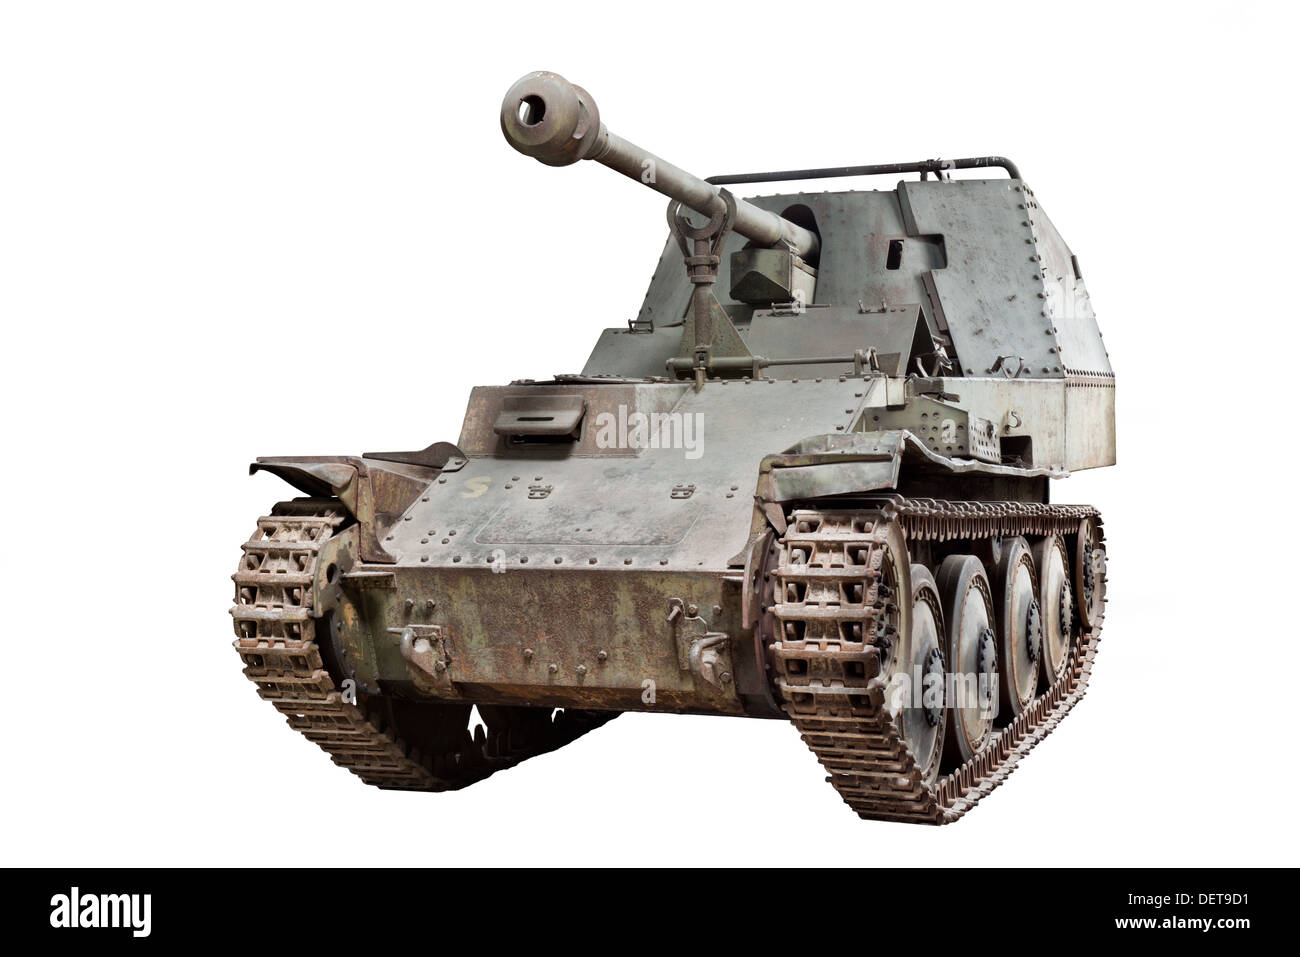 A cut out of a Marder 38 H ( Sd.Kfz.138) 75mm self propelled gun. Used by Nazi German forces during WW2 Stock Photo